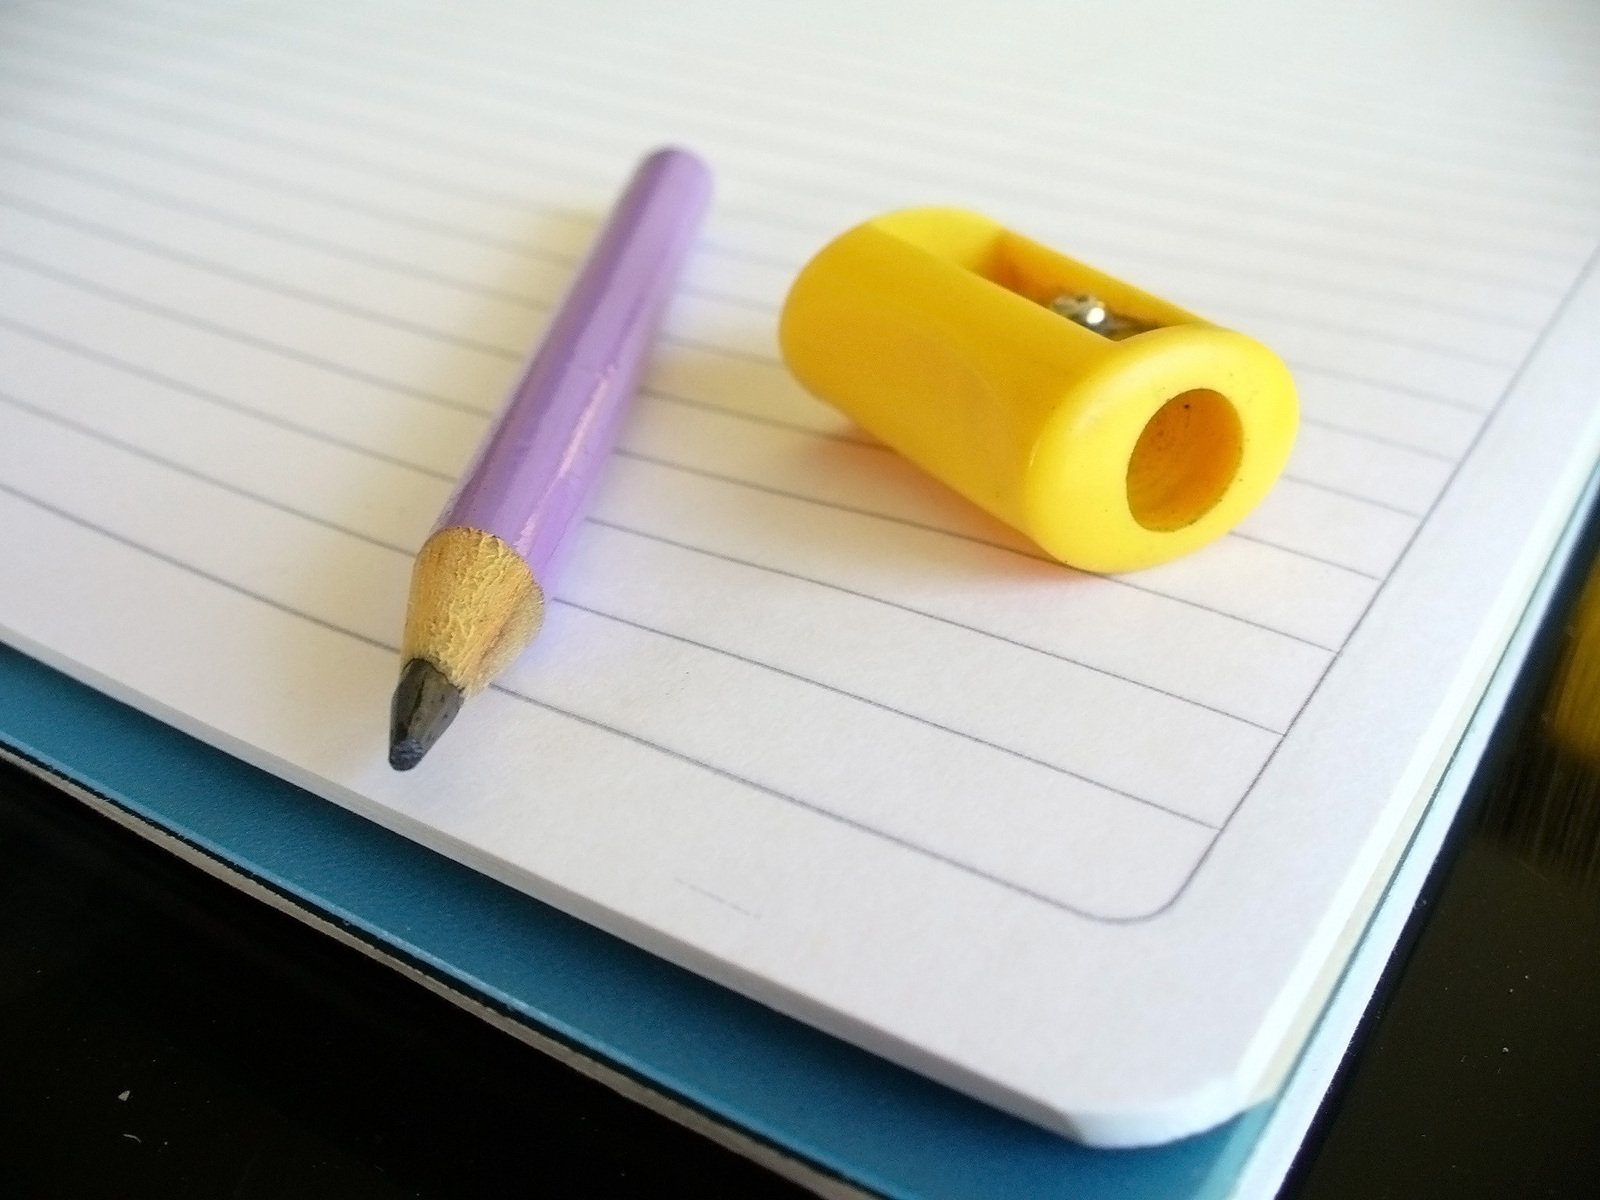 a yellow pen on top of a notebook next to a purple eraser